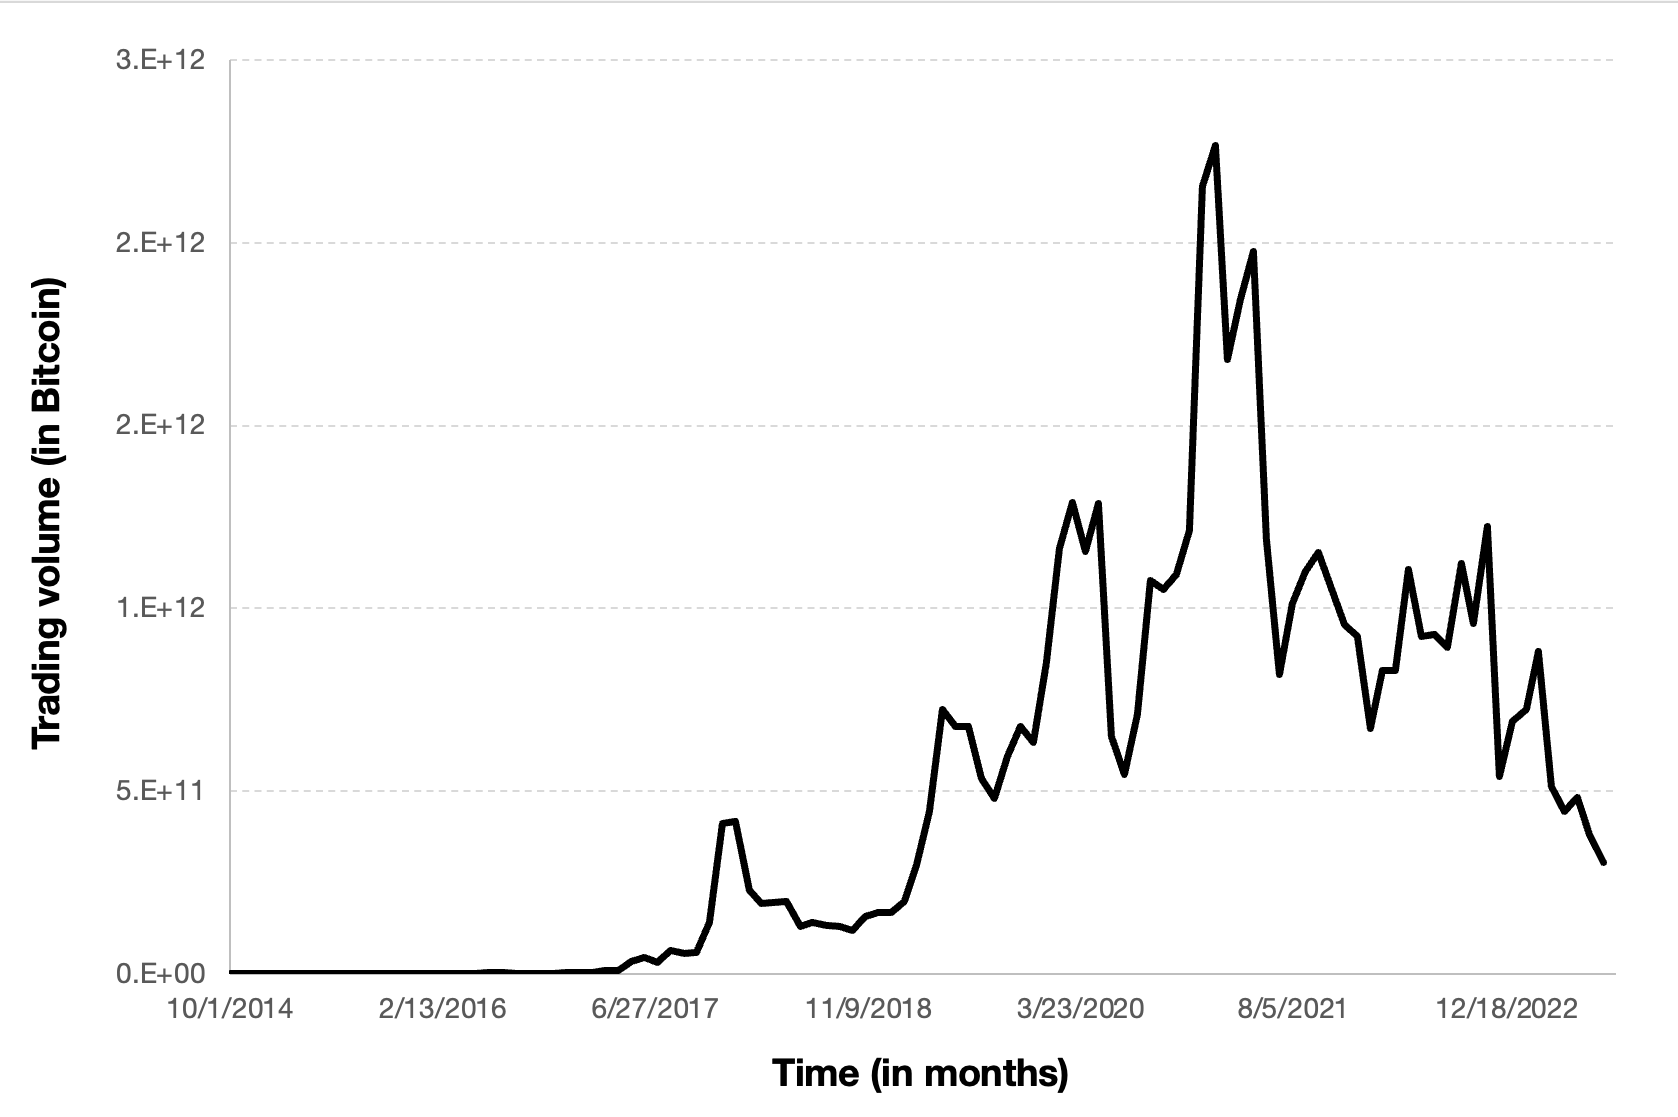 Evolution of the trading volume of Bitcoin